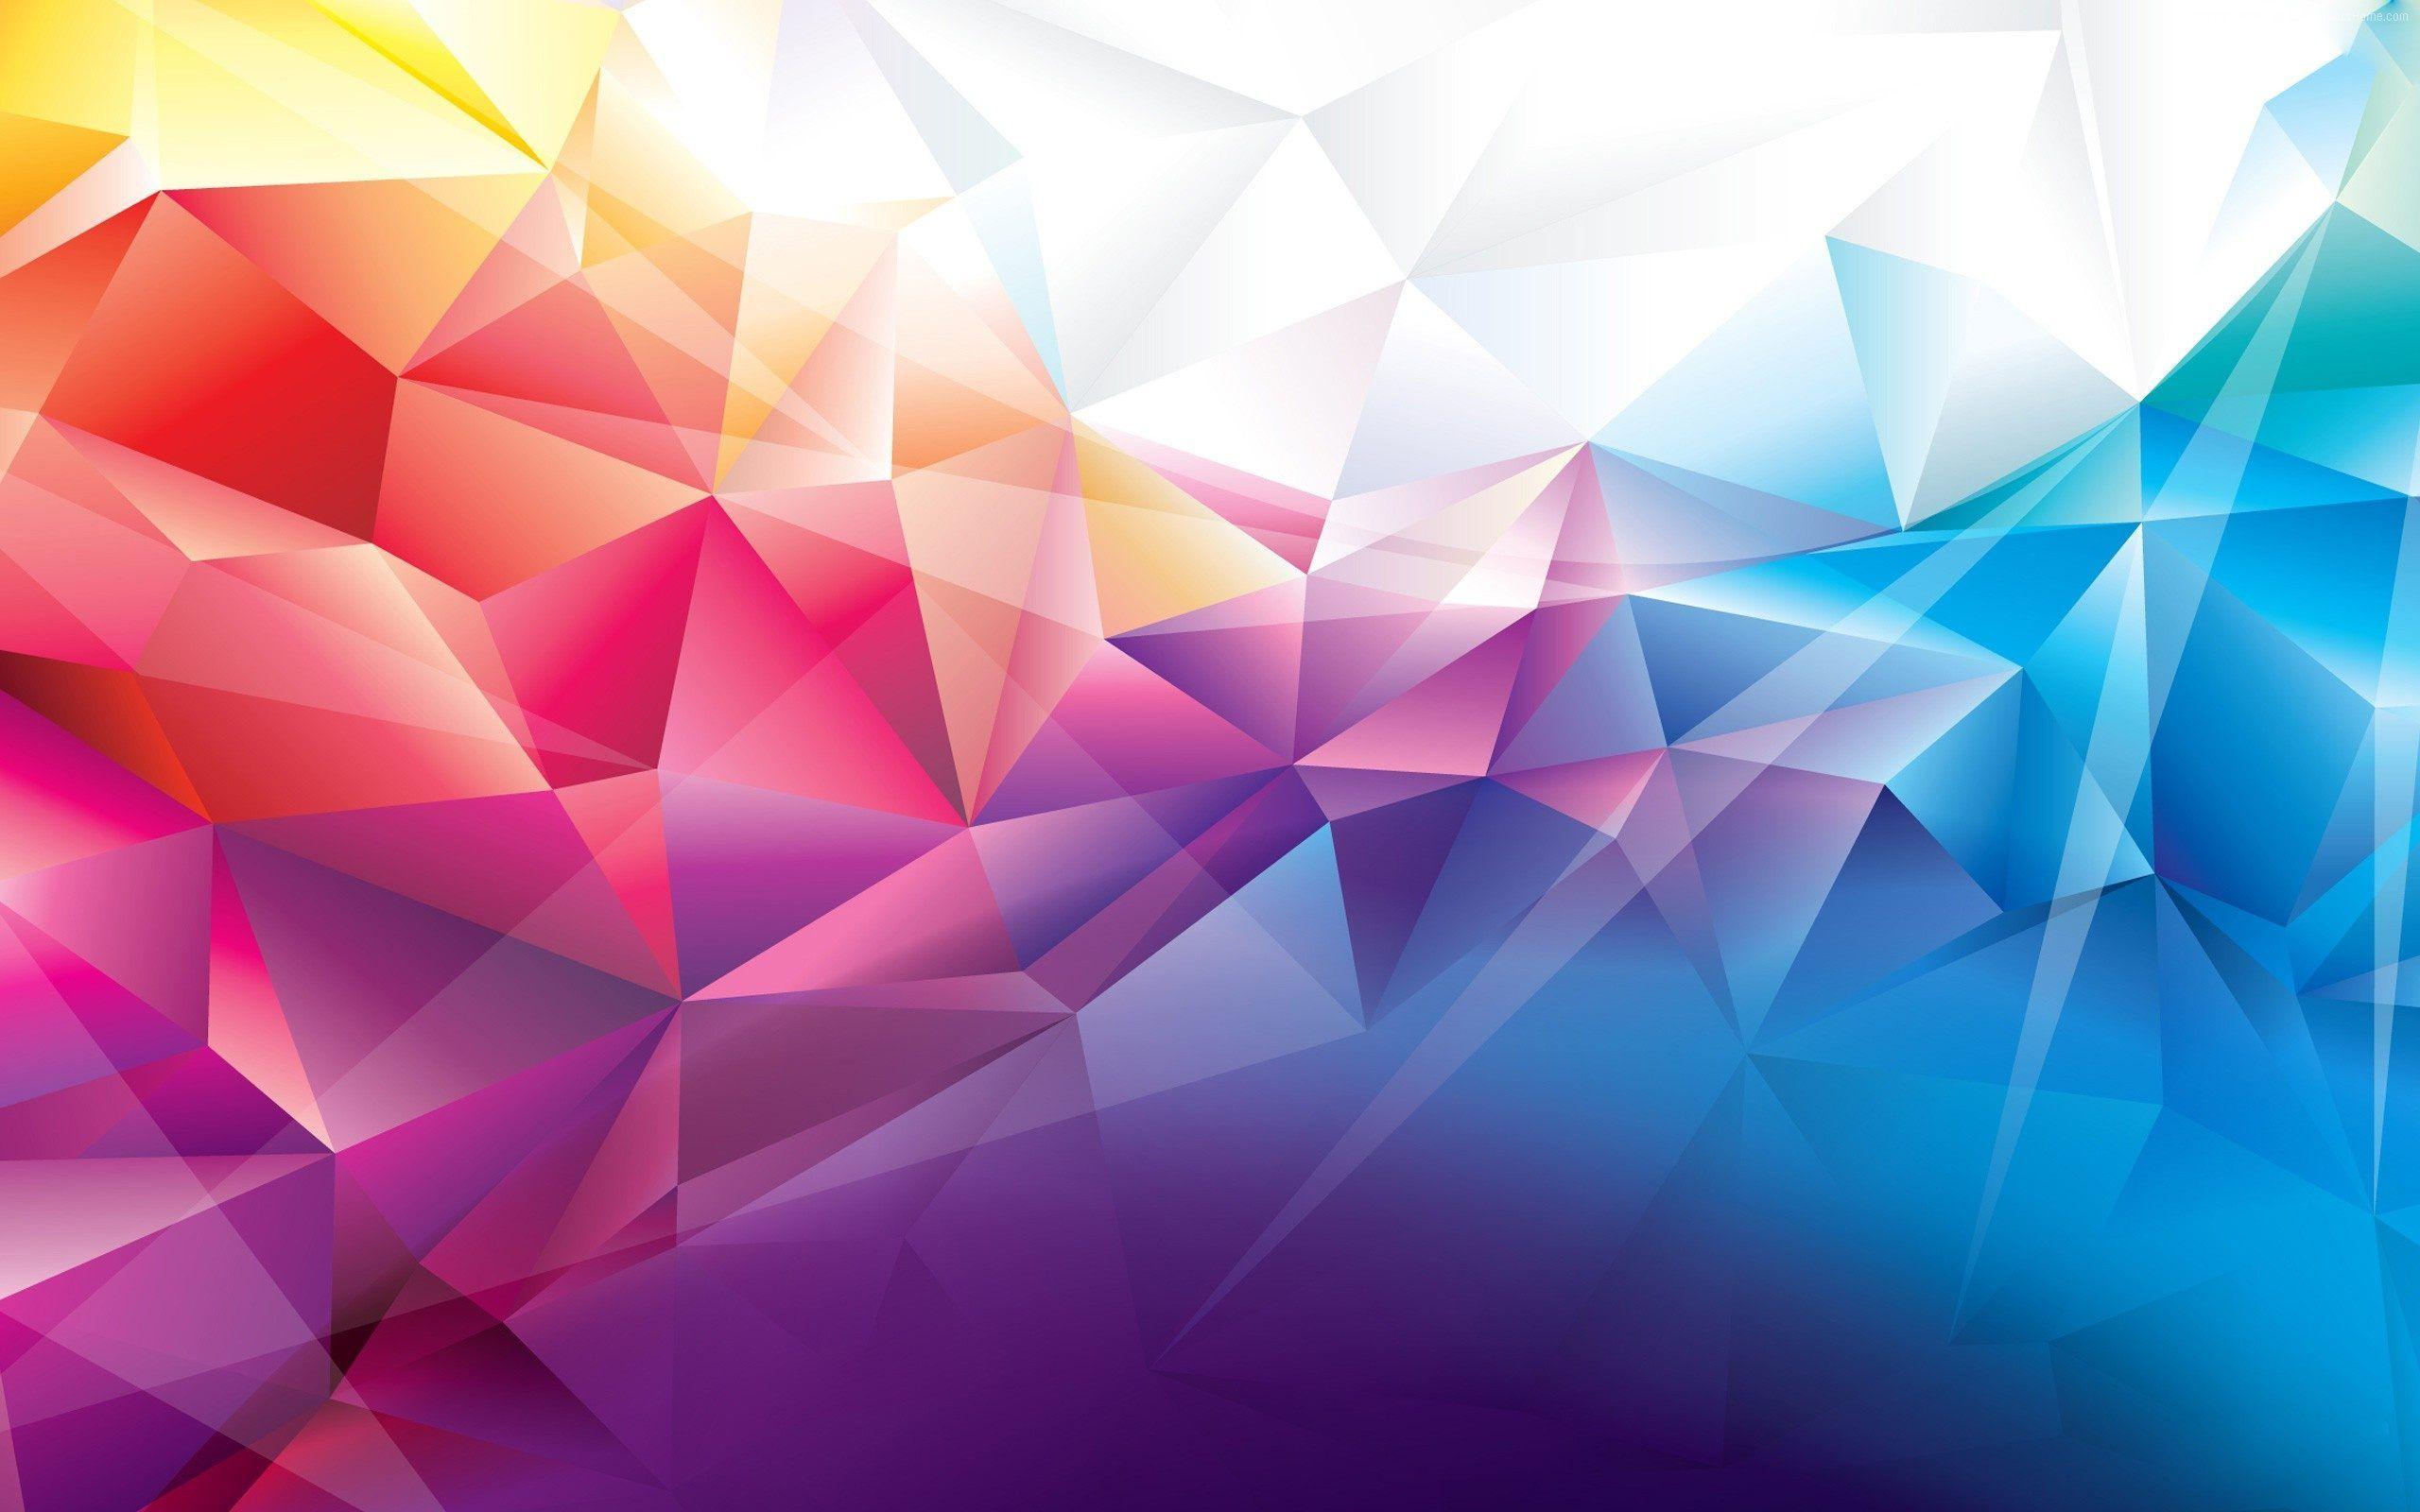 Polygon Shape Abstract Design Wallpaper HD For Desktop. Abstract